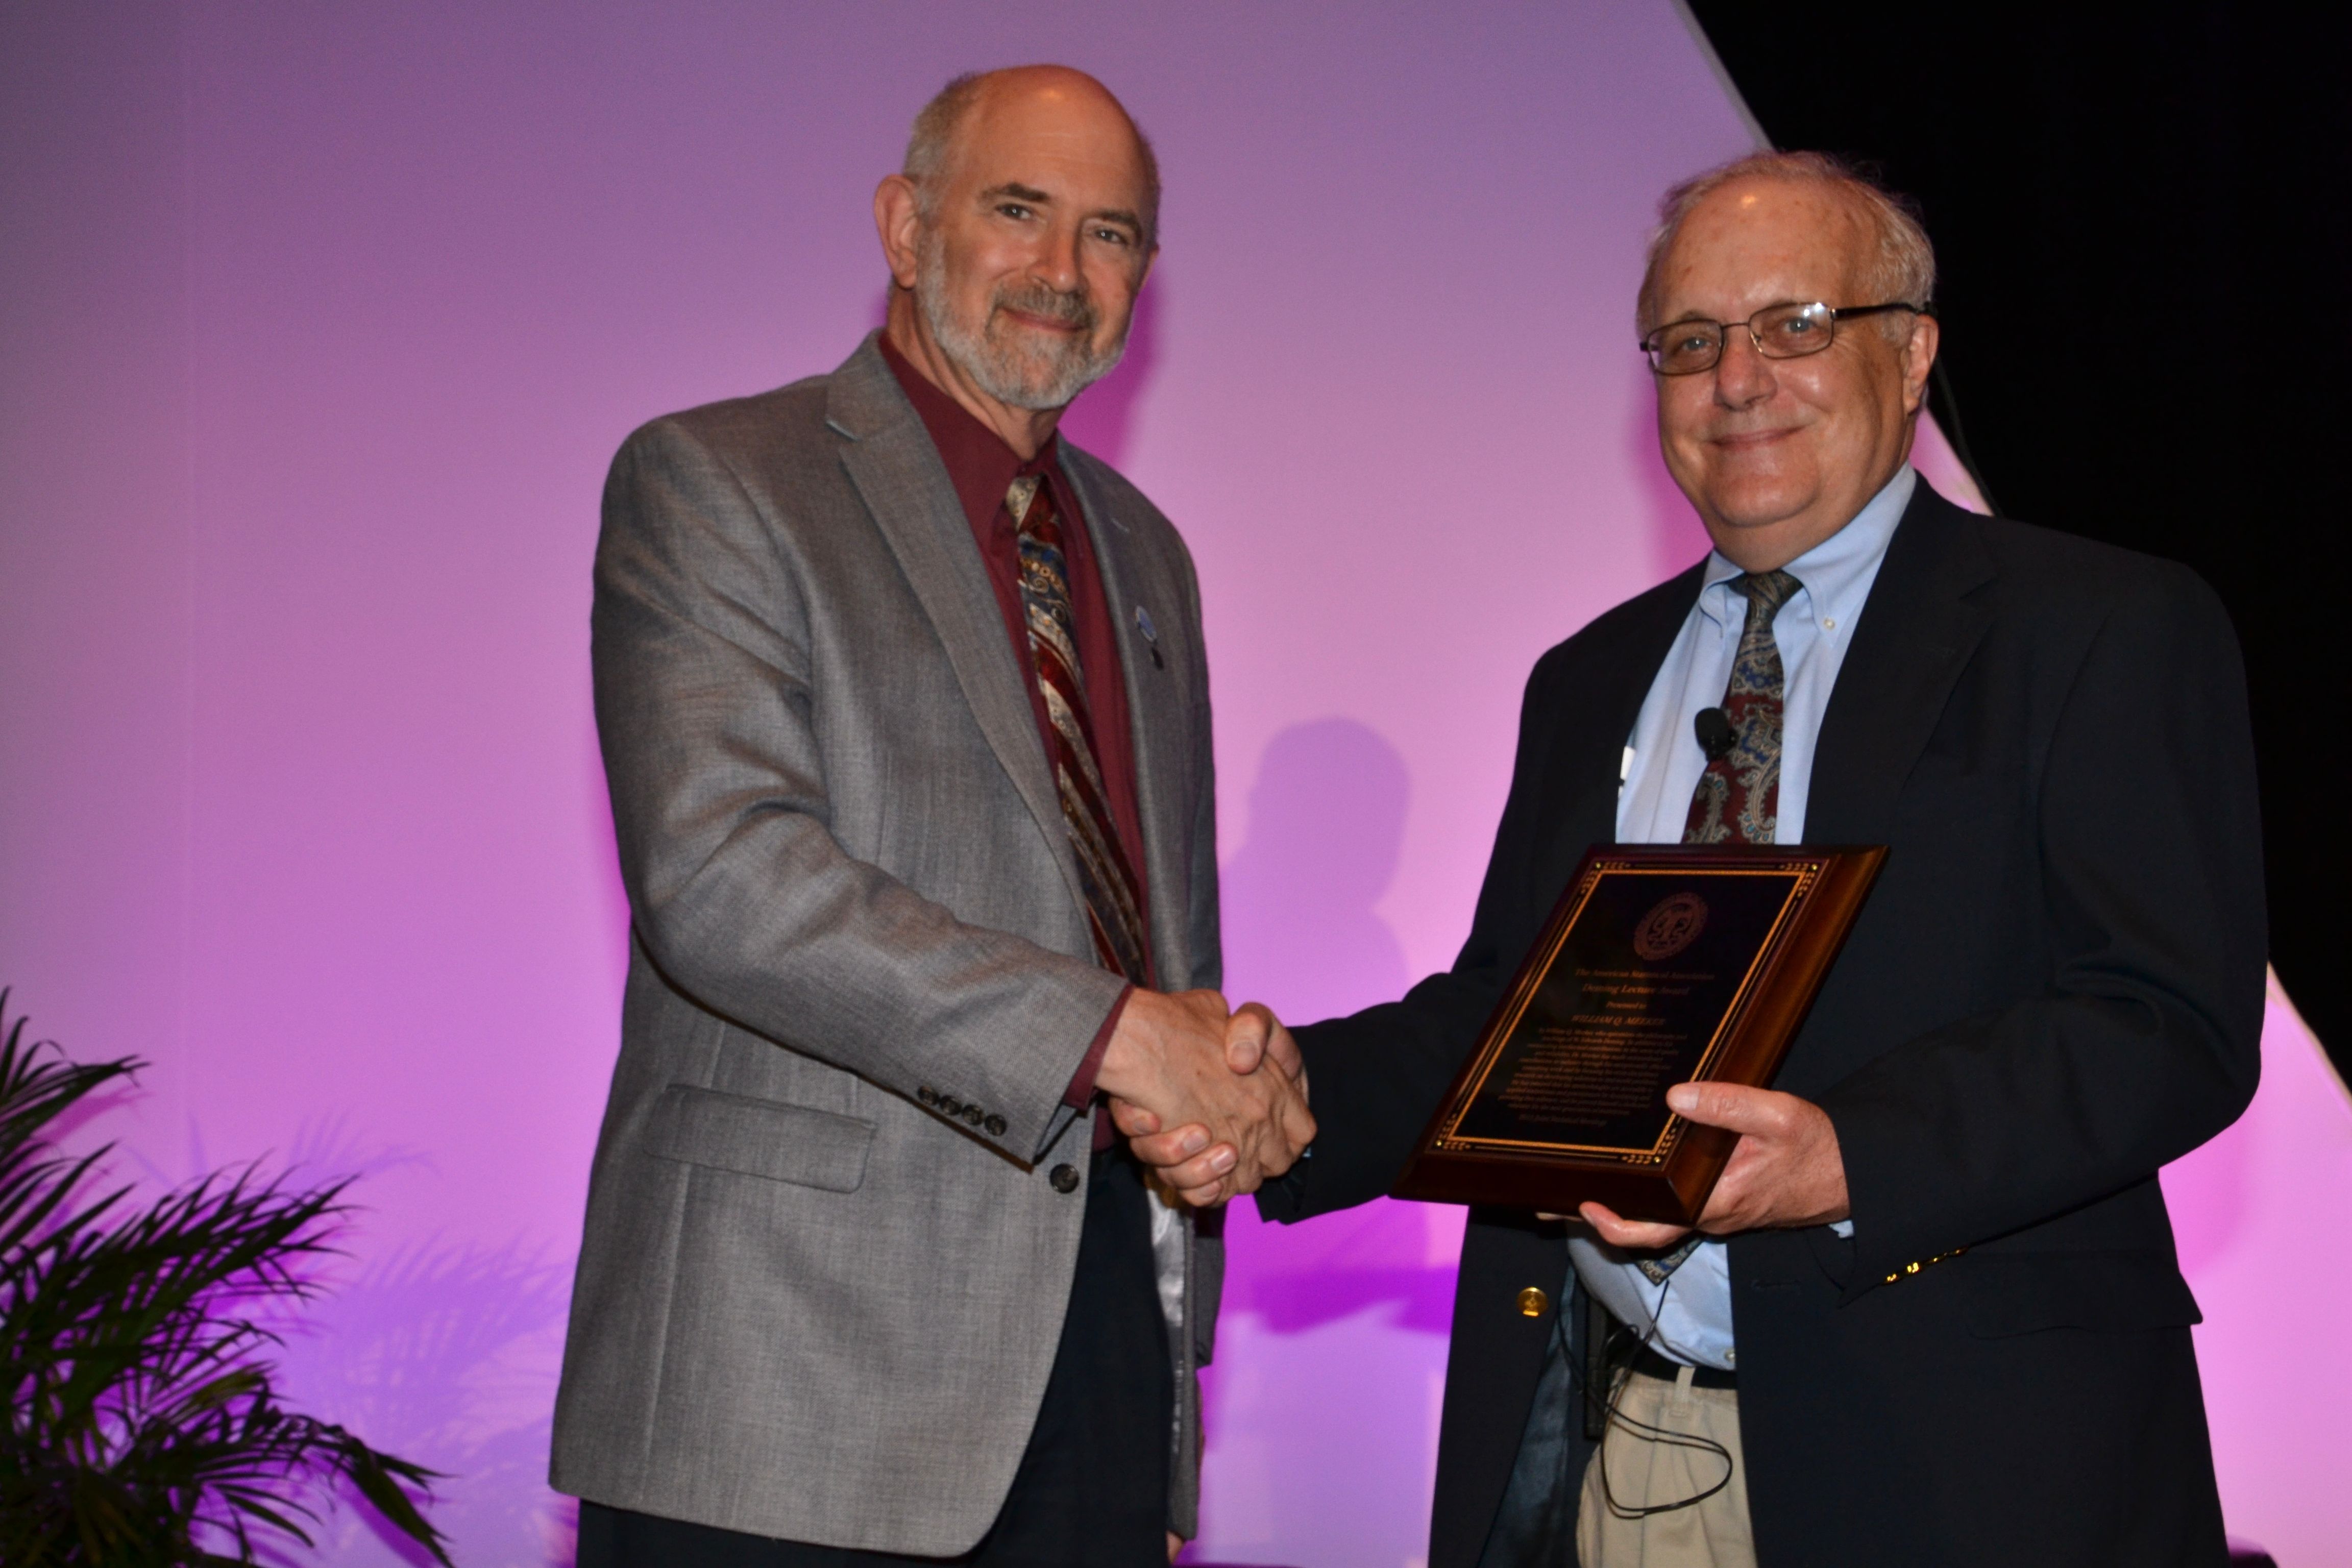 ASA Preisdent David Morganstein presents William Meeker with the Deming Lecture plaque.